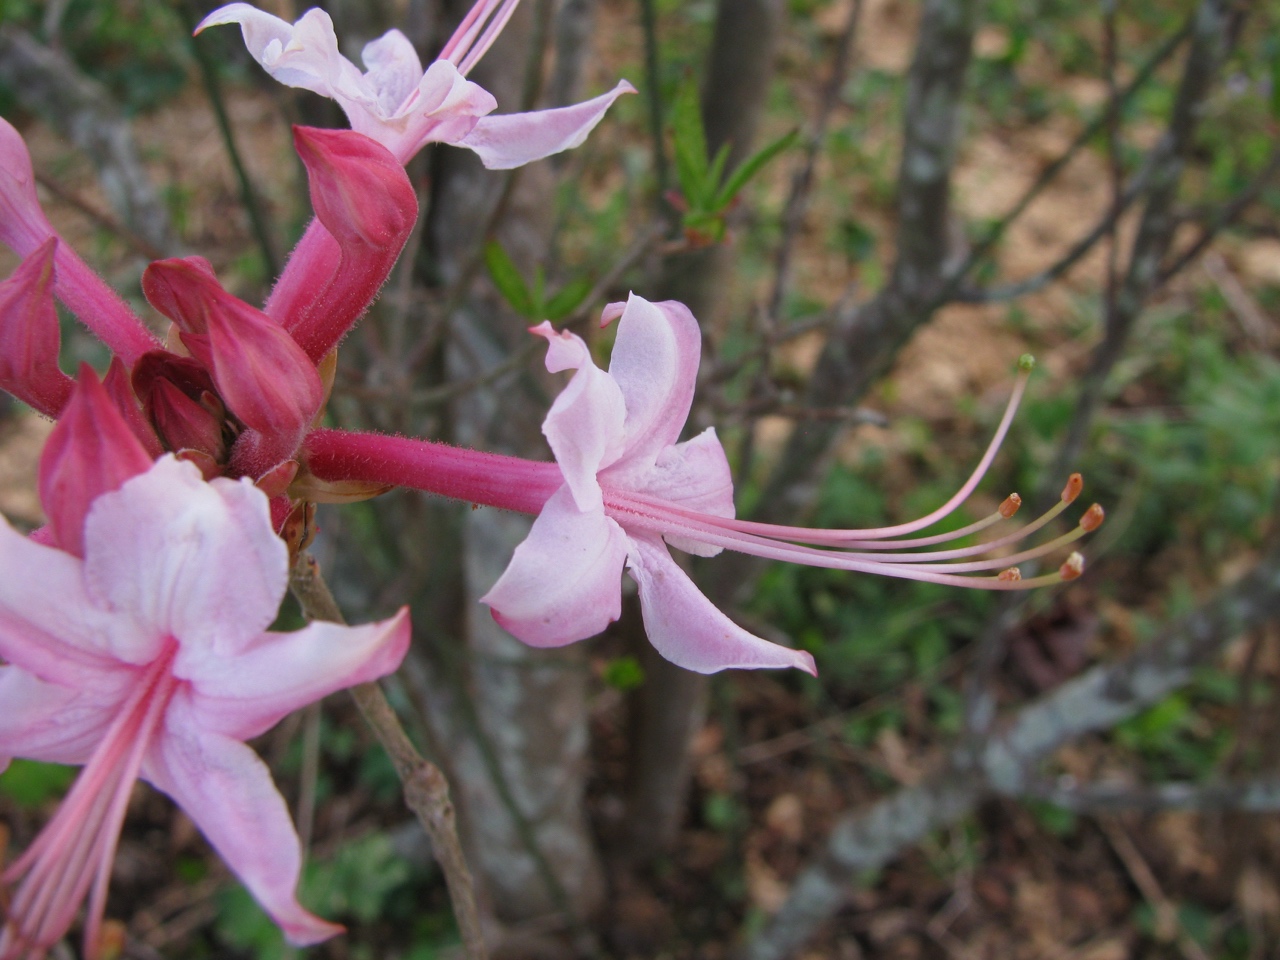 The Scientific Name is Rhododendron canescens. You will likely hear them called Piedmont Azalea, Southern Pinxter Azalea, Wild Azalea, Hoary Azalea, Mountain Azalea, Florida Pinxter Azalea. This picture shows the Narrow and long flower tube of Rhododendron canescens